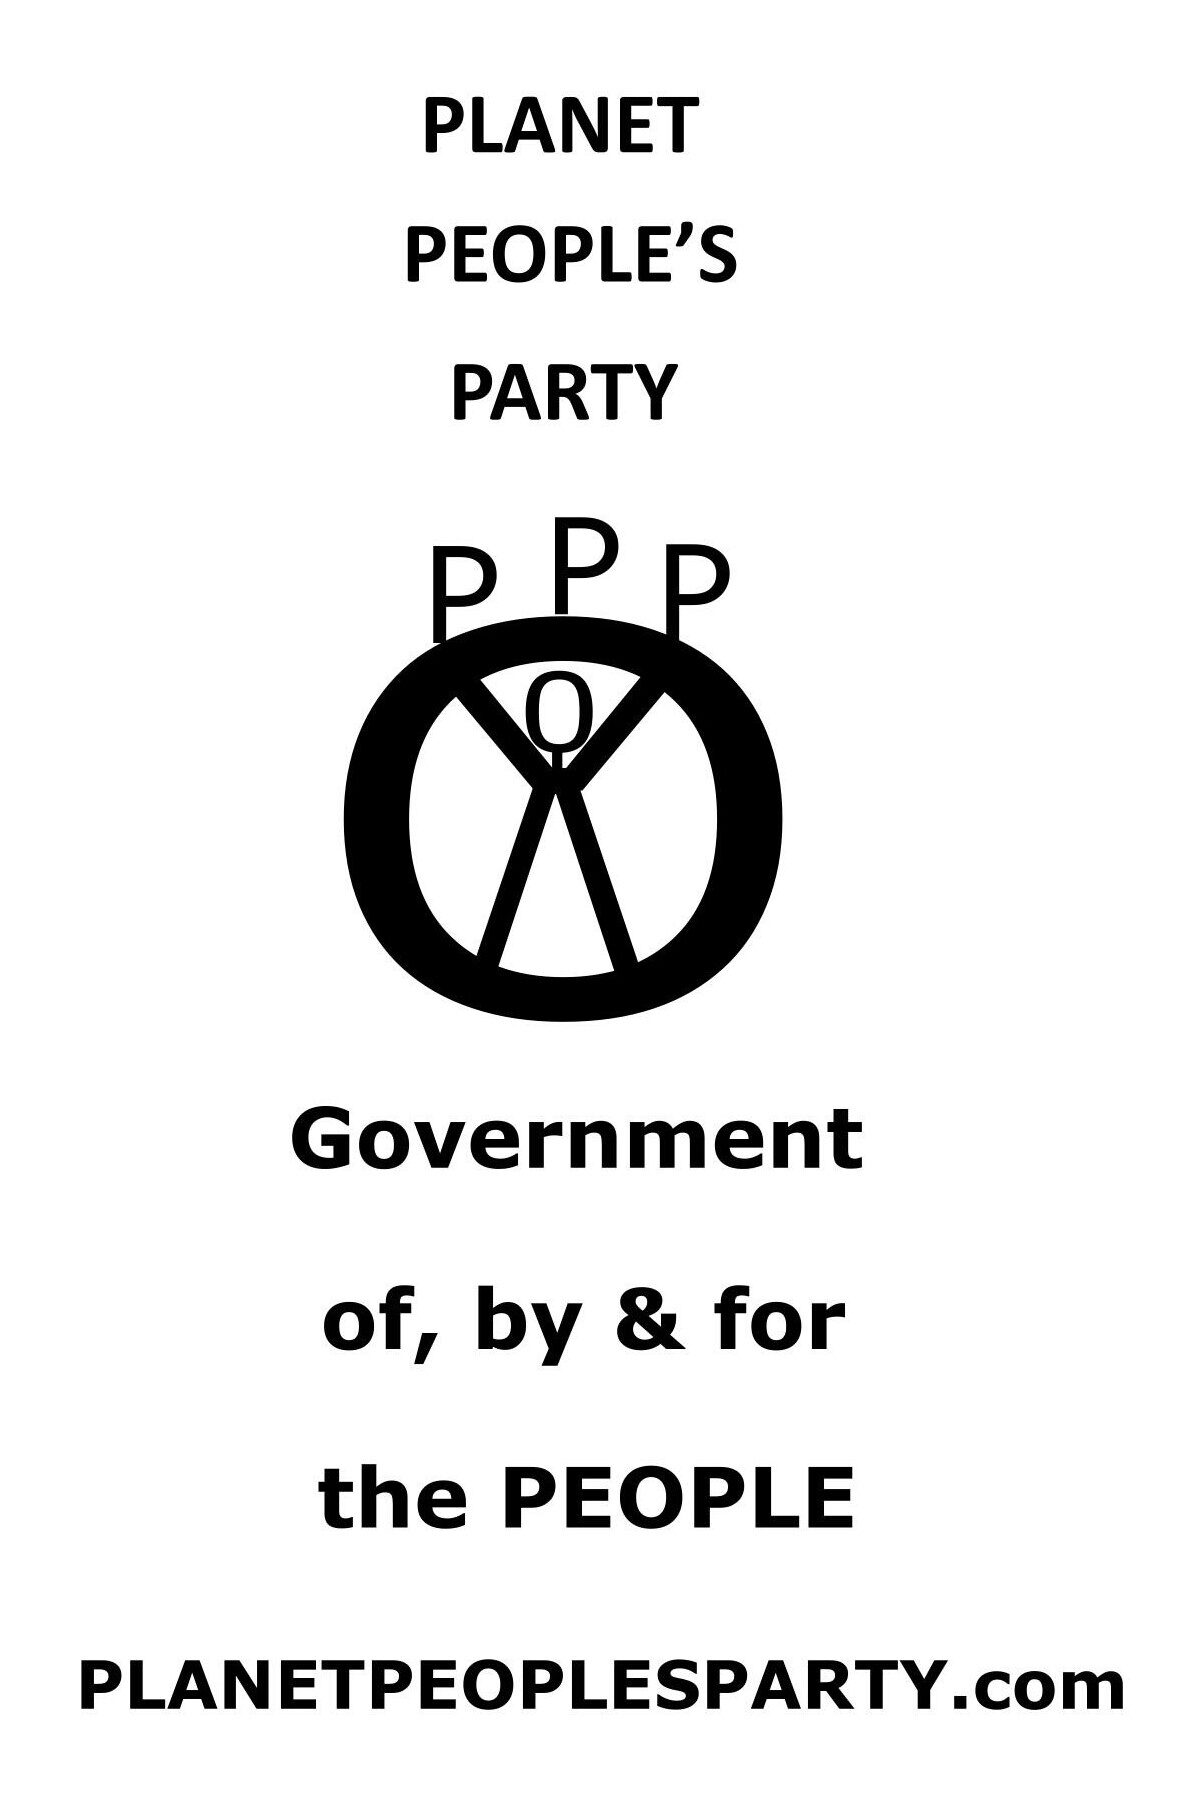 People's Party Platform (PlanetPeoplesParty.com), also see EarthPeoplesParty.com and GoPP.global